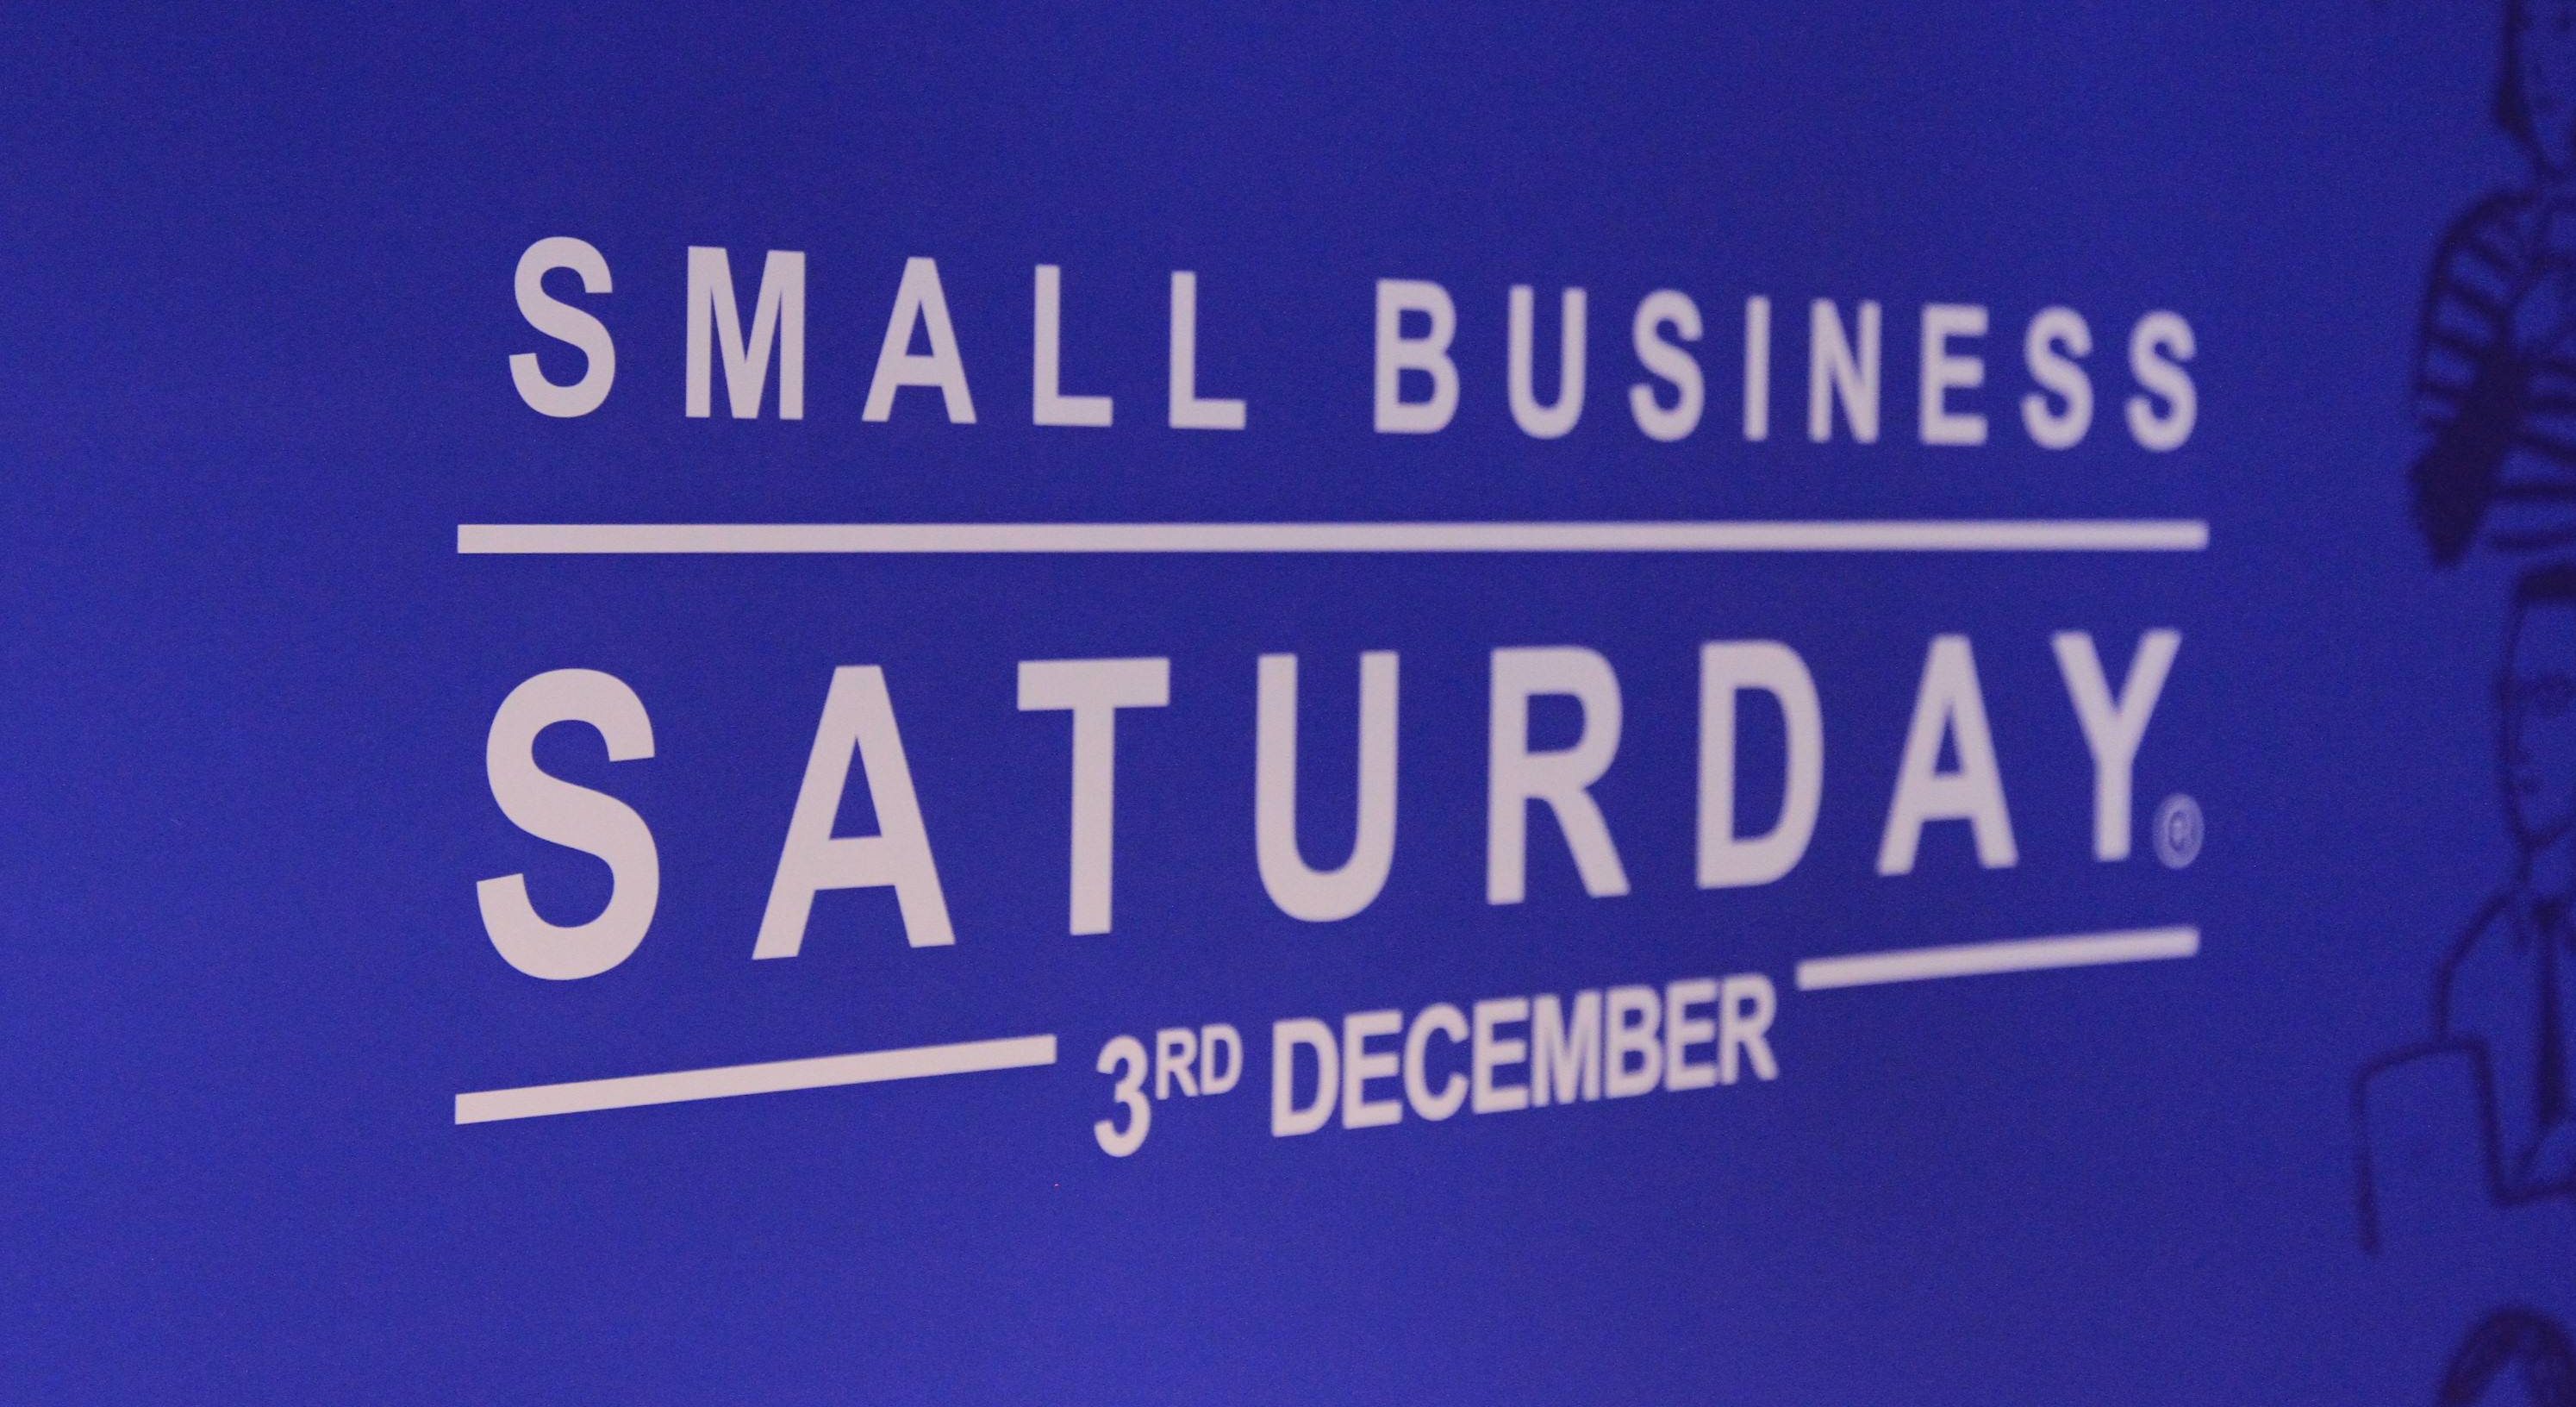 Retailers urged to 'get involved' with Small Business Saturday